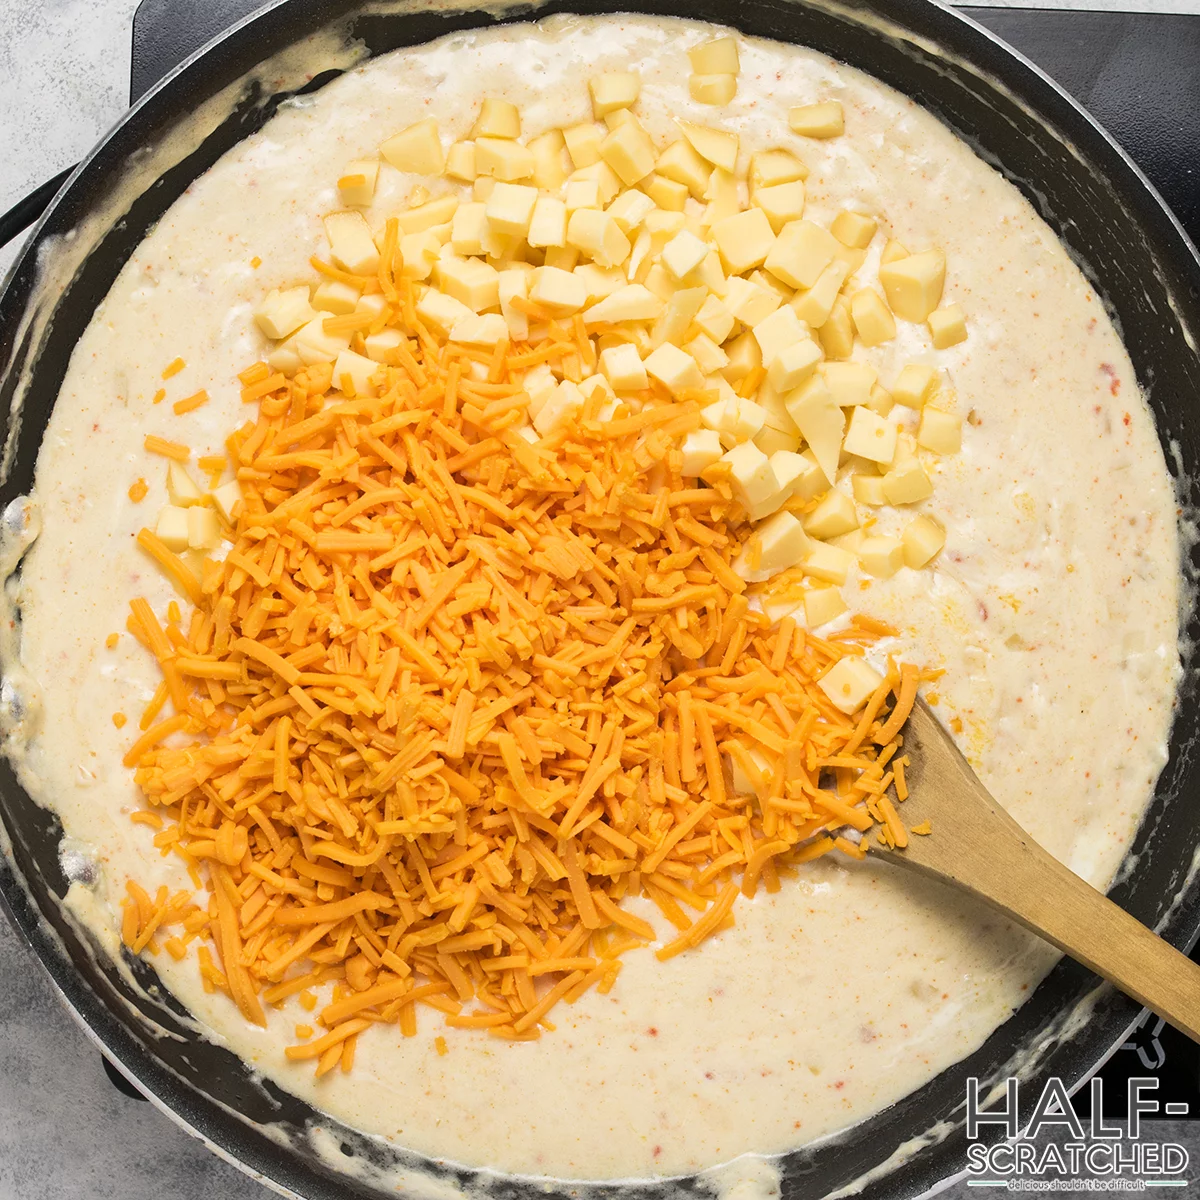 Processed cheese and cheddar